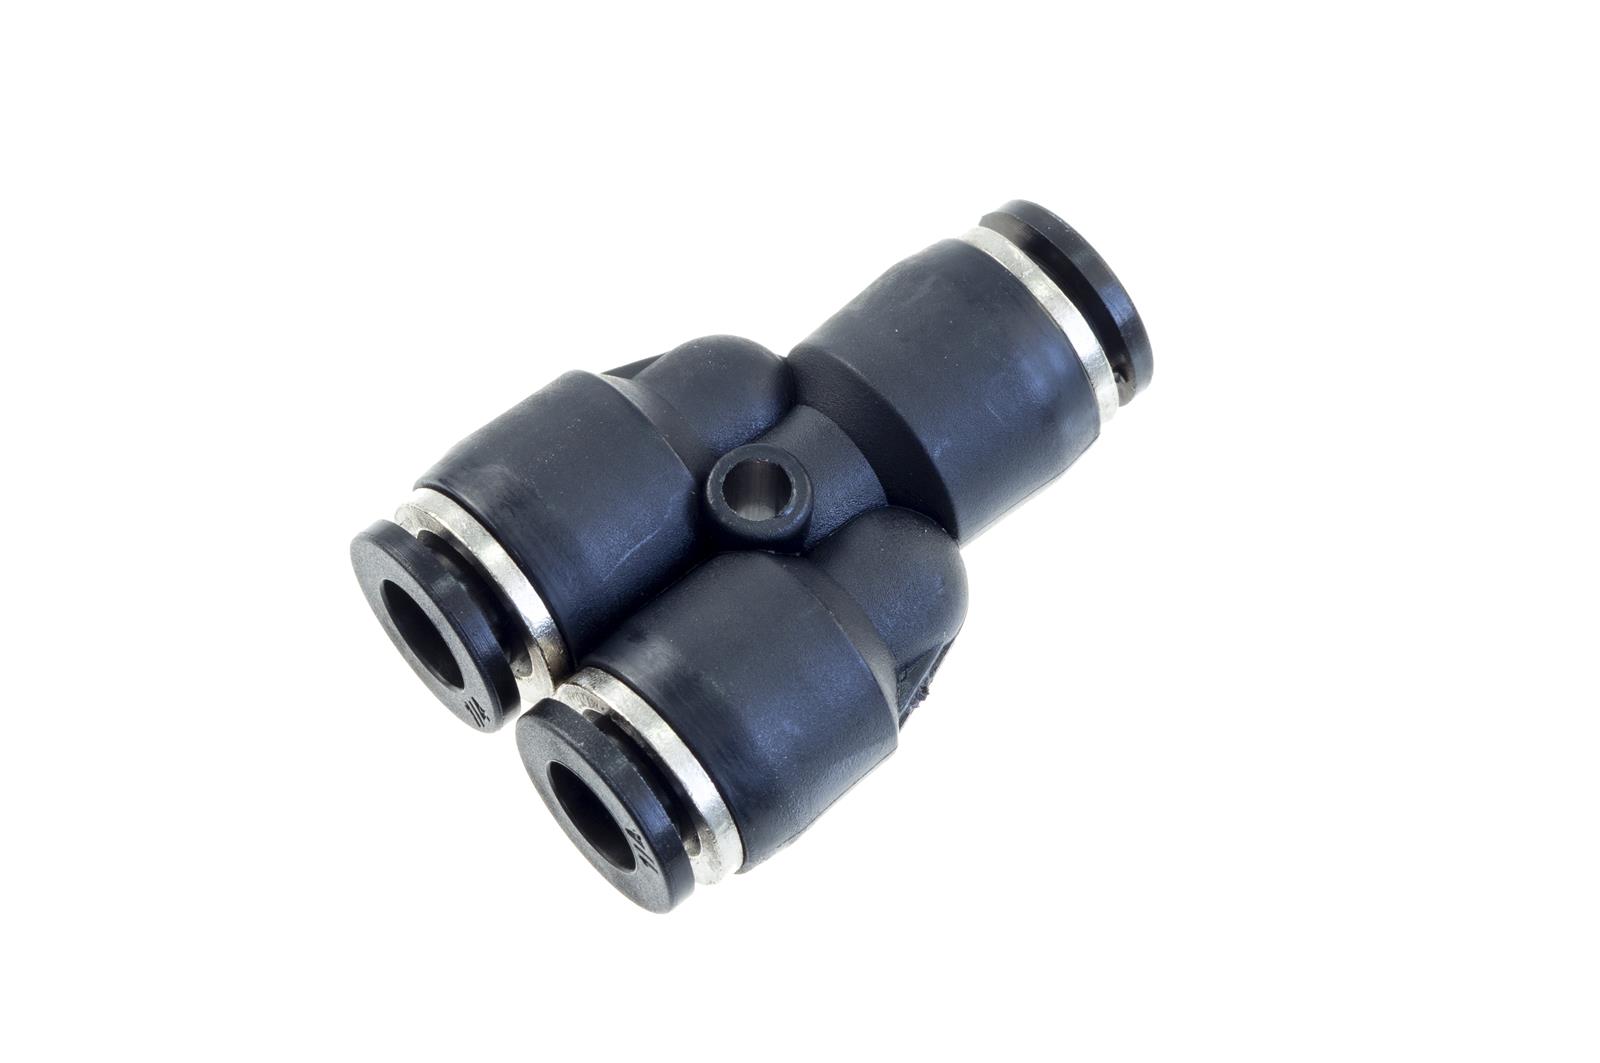 Redhorse Performance 4730-03-03-2 5/32in Vacuum Fitting Y Union (5/32in to 5/32in), Push To Connect - black